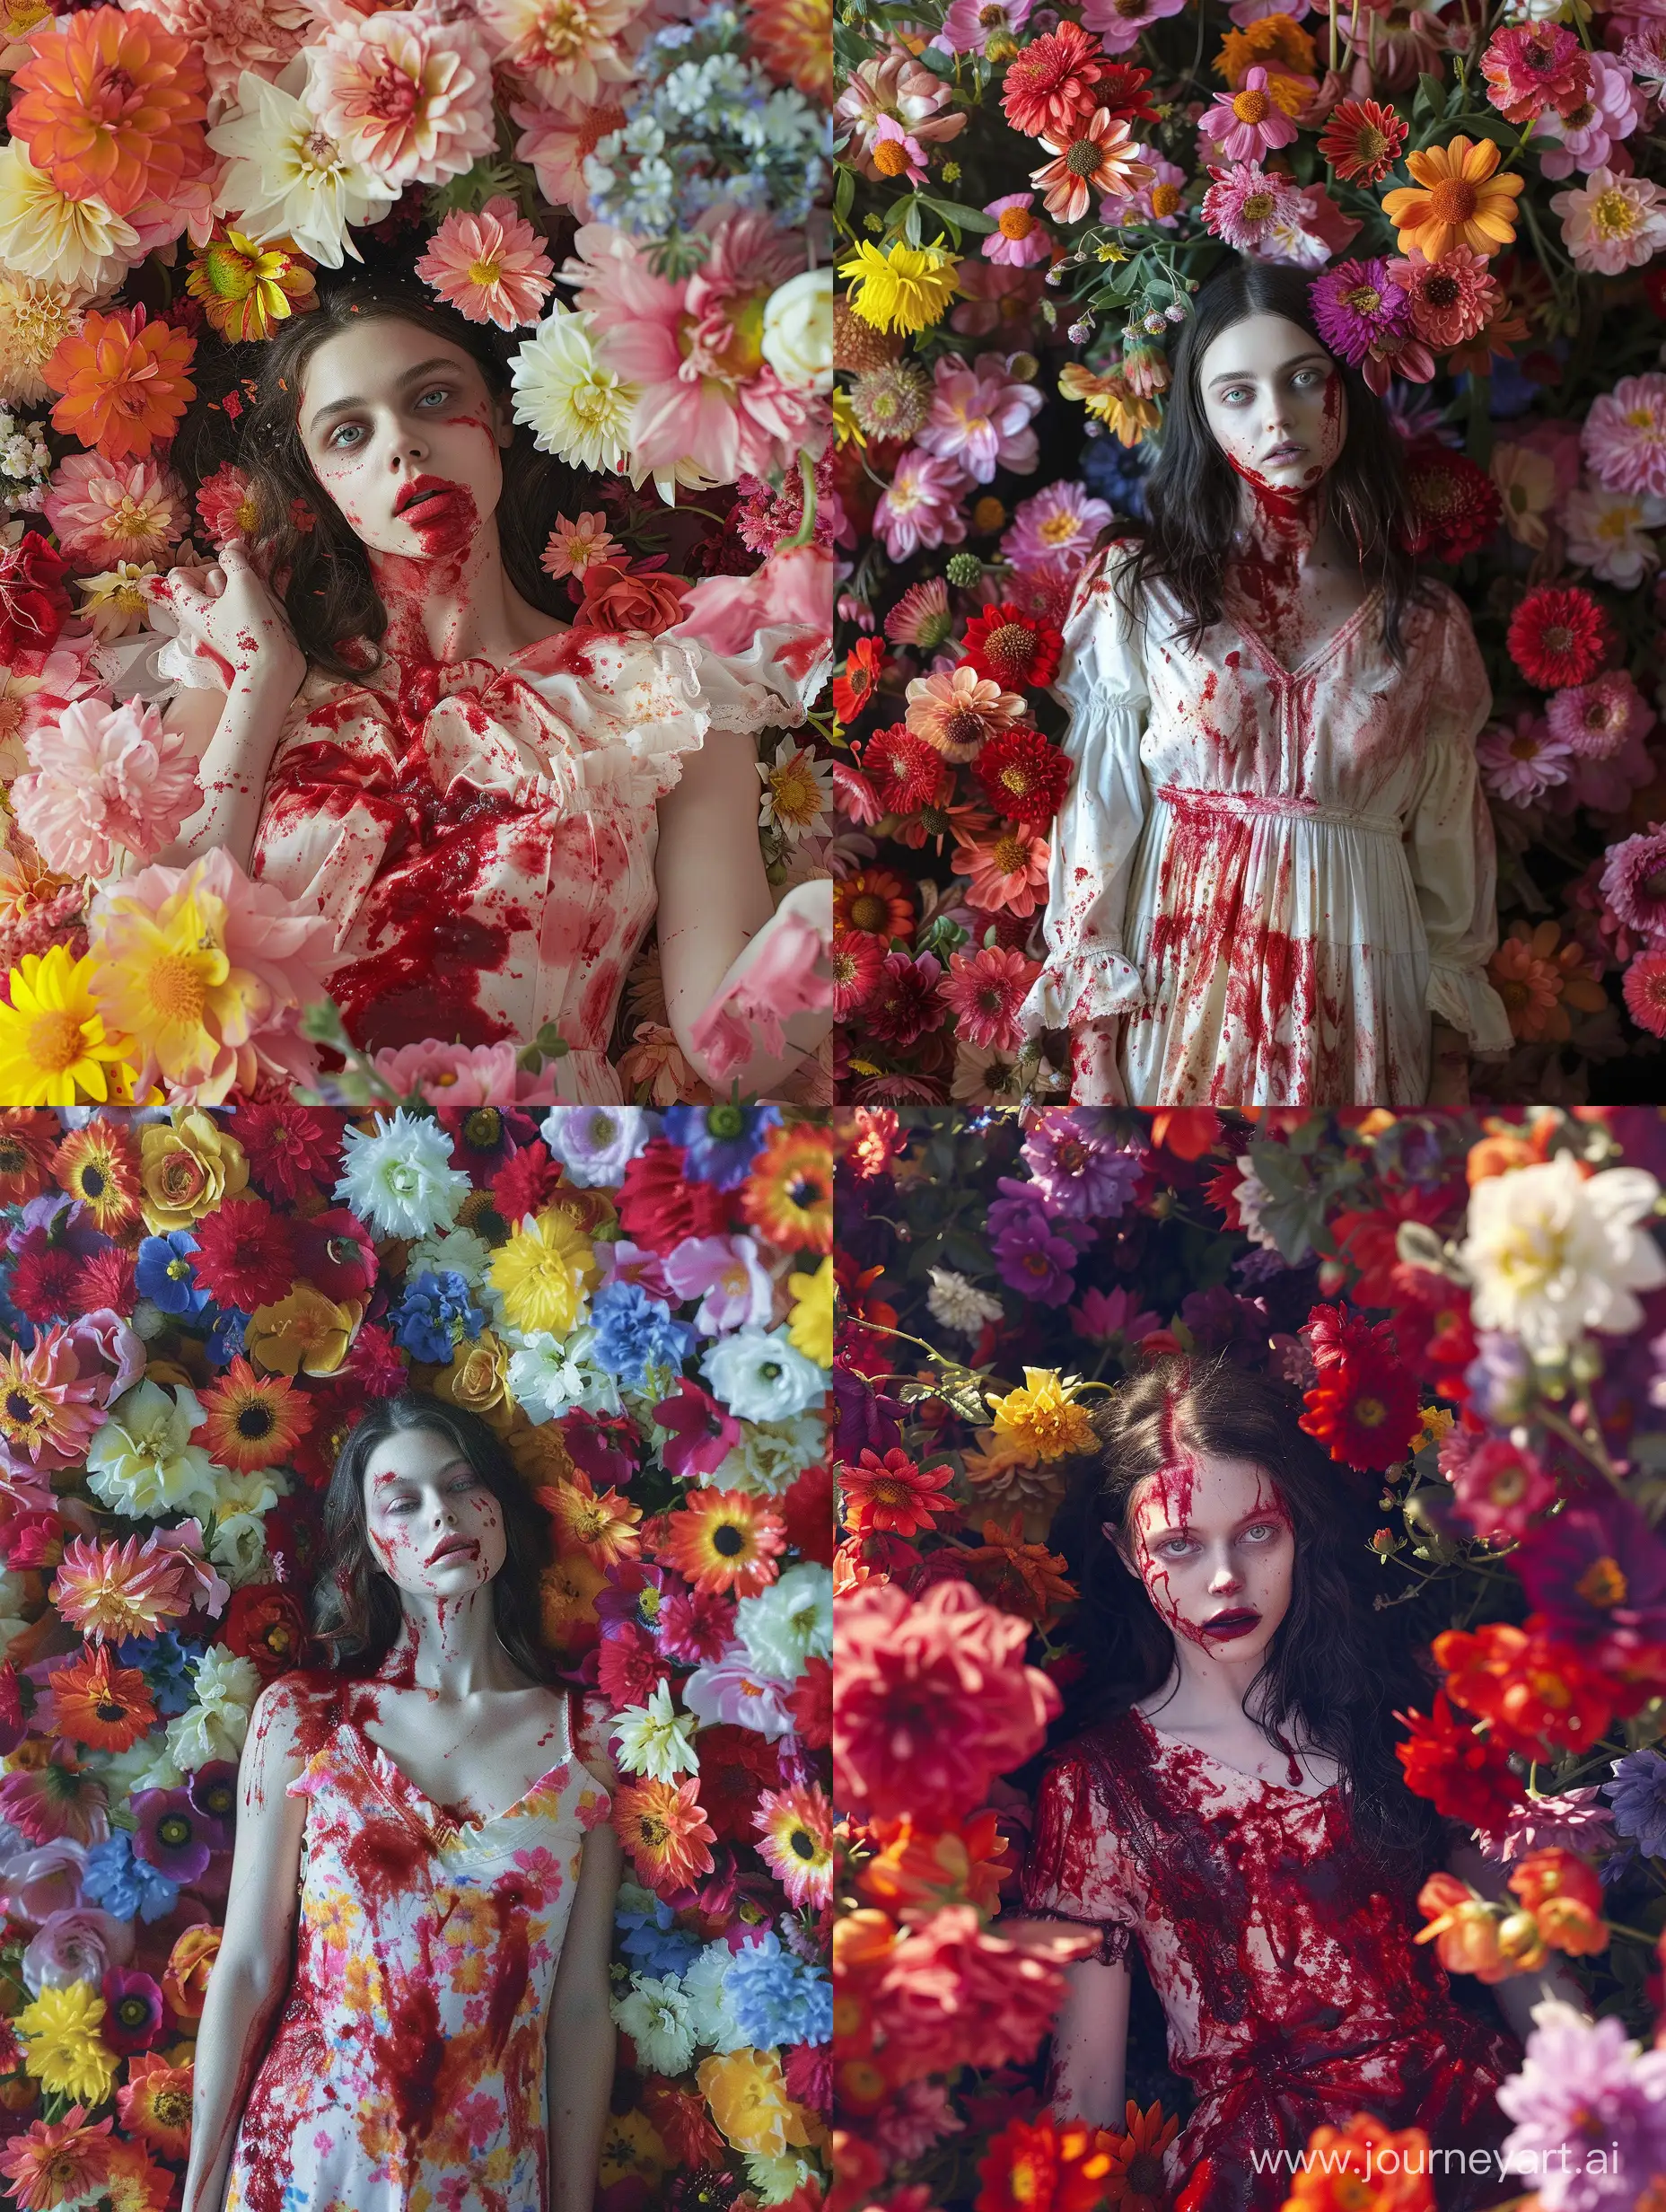 A mesmerizing eerie photo captures a beautiful young woman in her 20s with a  blank stare and completely covered in blood from head to toe, standing amidst a kaleidoscope of vibrant flowers, embodying the clash between her desire for beauty and the oppressive belief that vanity is sinful, horror core, dark aesthetic, Tom bagshaw, Miles Aldridge, James bidgood, dark horror